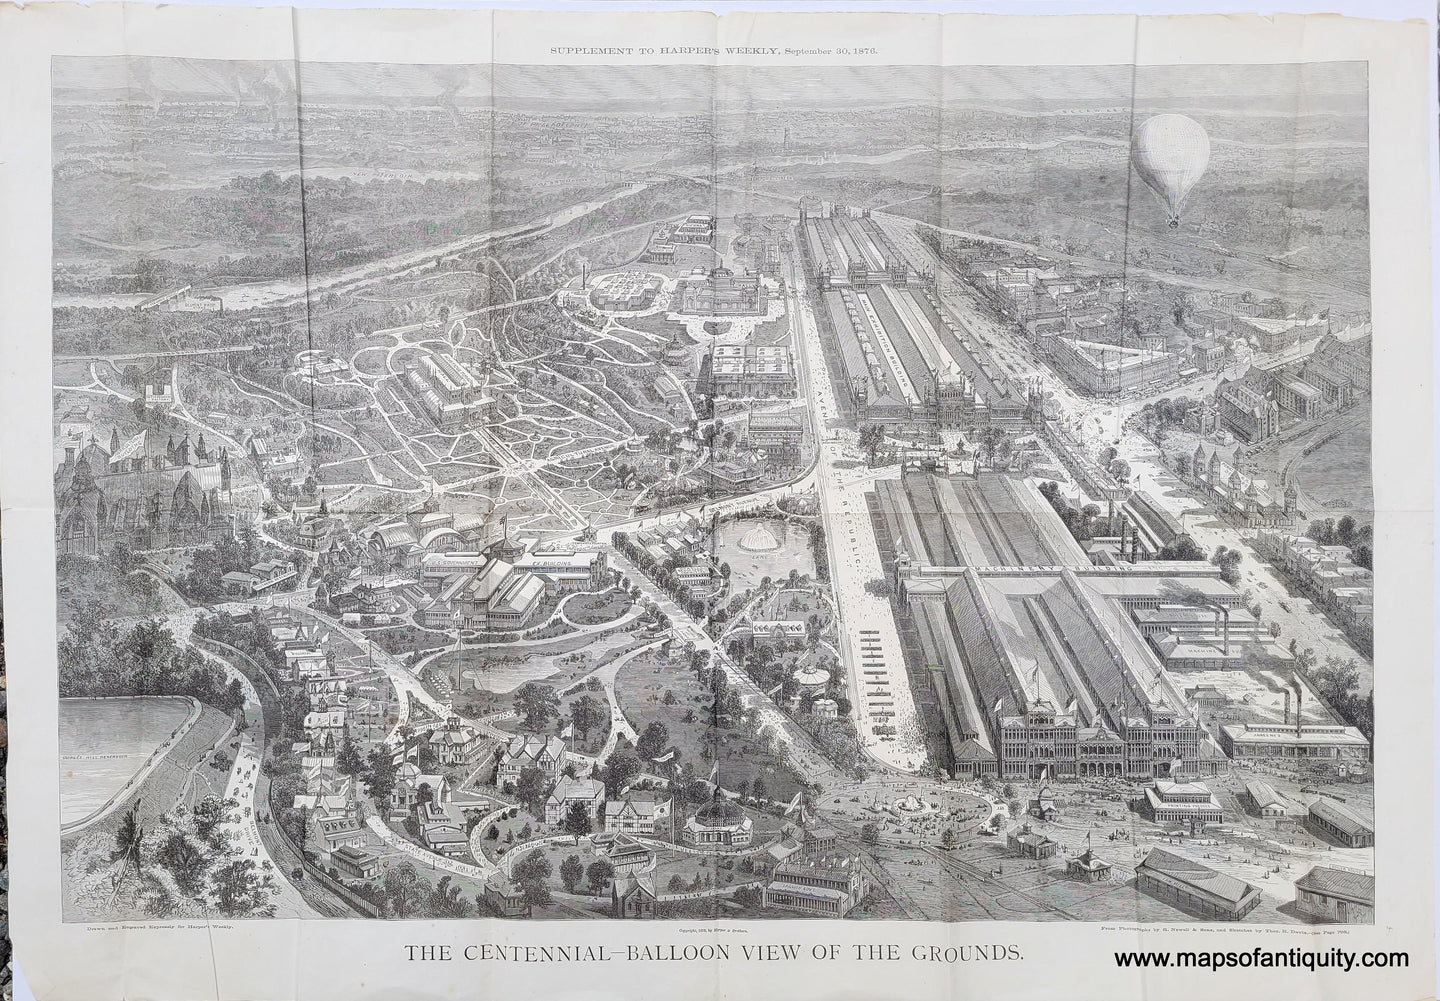 Genuine-Antique-Map-The-Centennial---Balloon-View-of-the-Grounds-Philadelphia--1876-Harpers-Weekly-Maps-Of-Antiquity